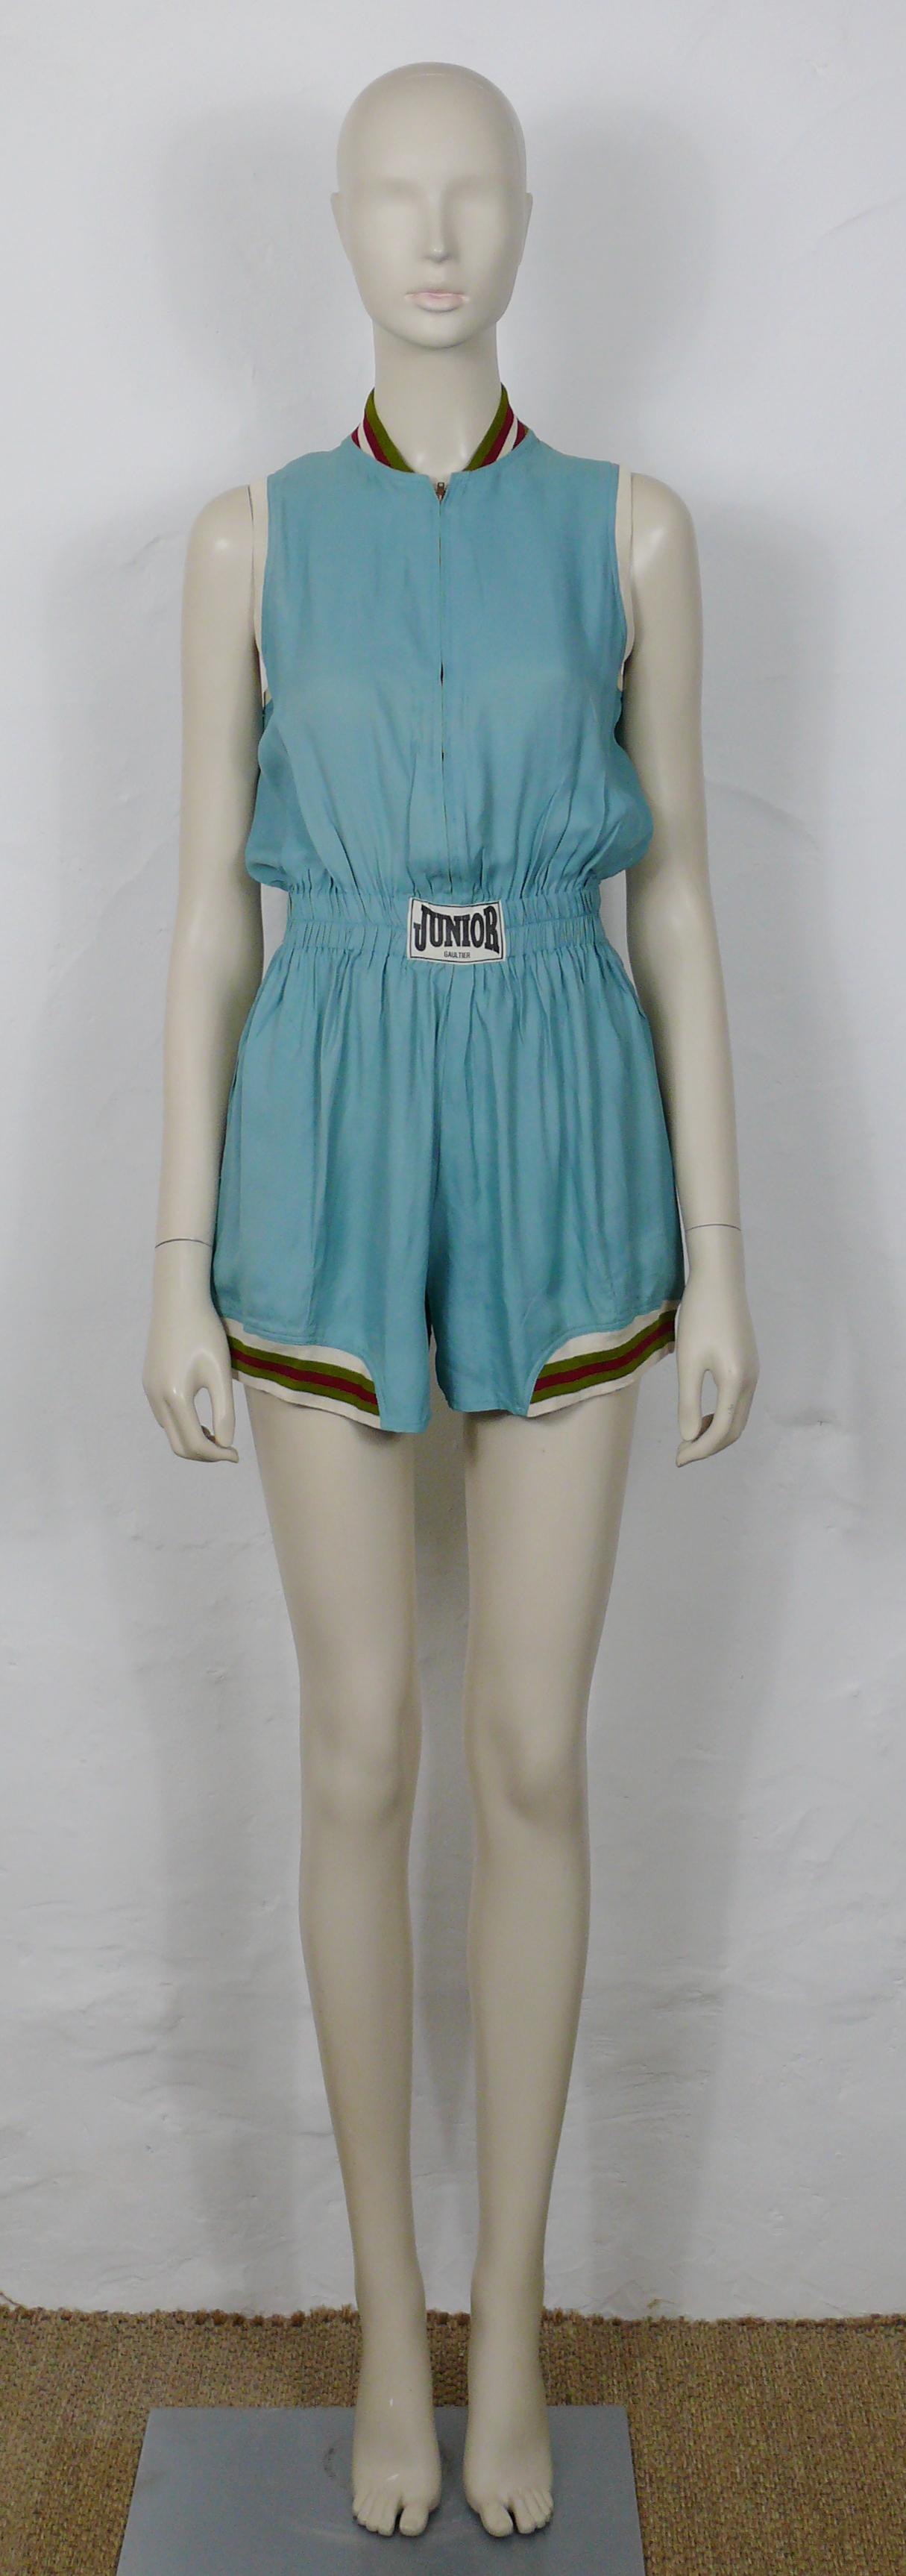 Jean Paul Gaultier Vintage 1990s Turquoise Blue Shortall In Good Condition For Sale In Nice, FR